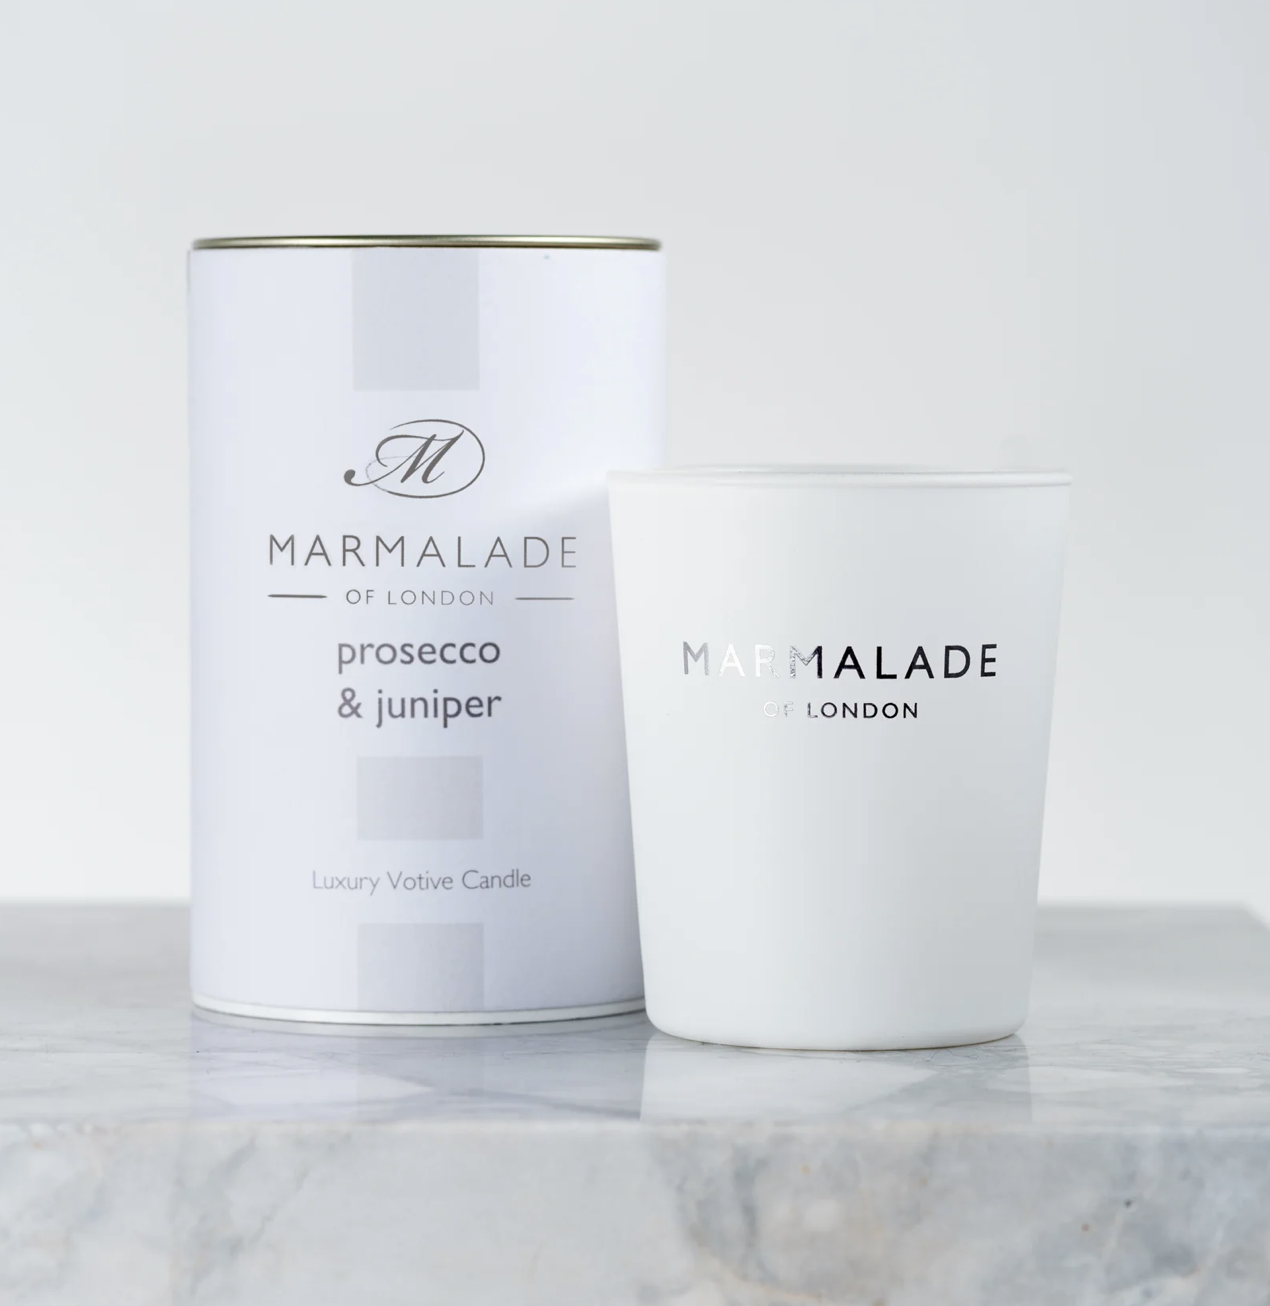 marmalade-of-london-70g-glass-prosecco-and-juniper-votive-soy-candle